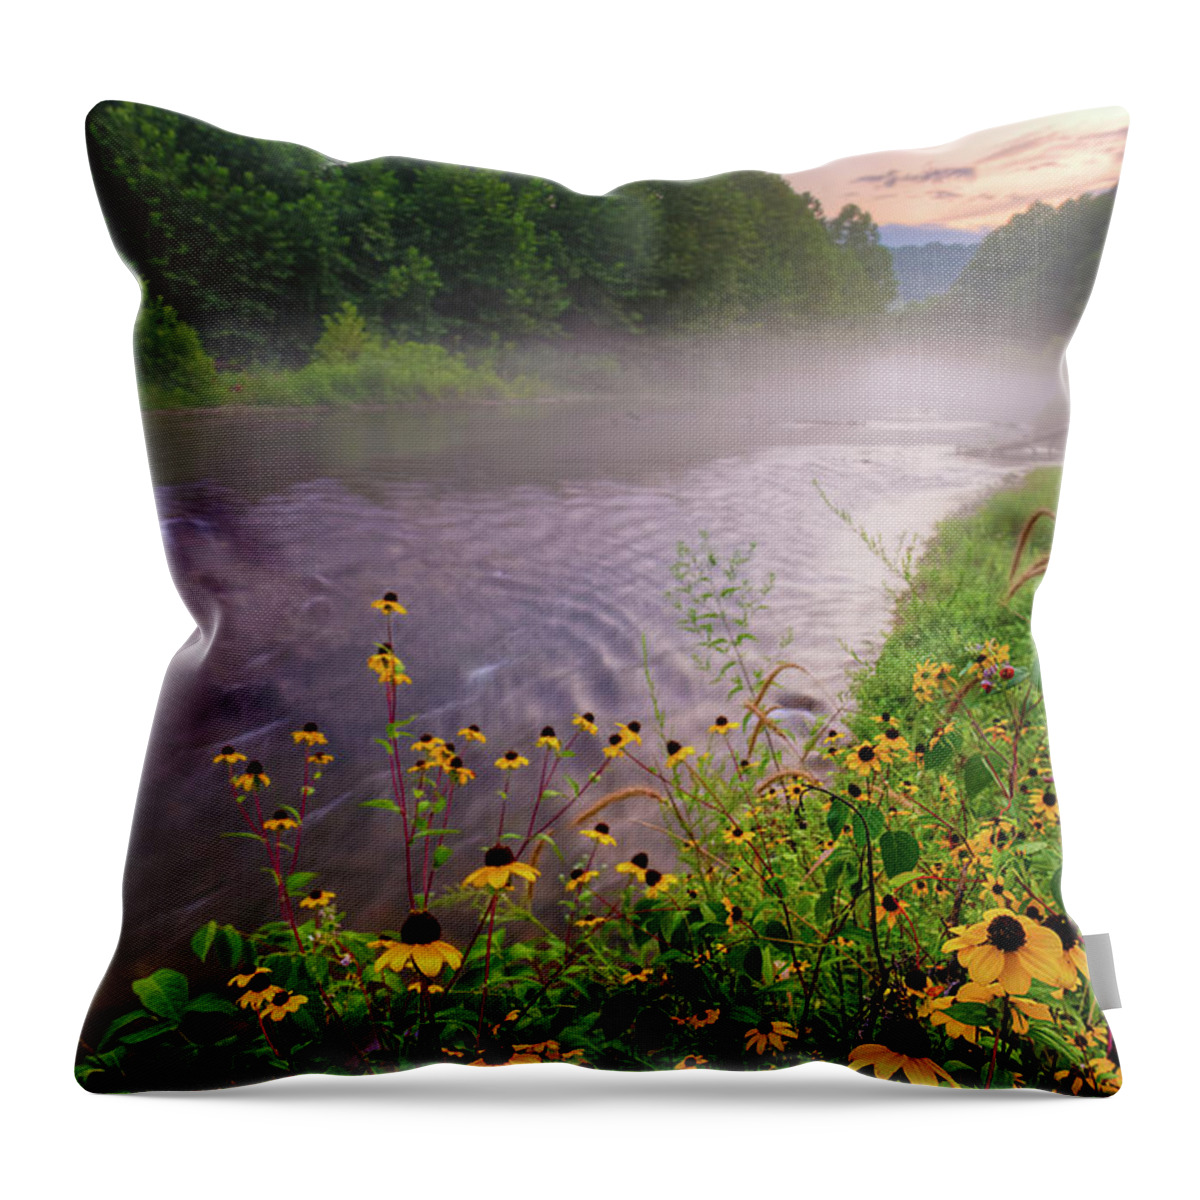 Wildflowers Throw Pillow featuring the photograph Little Piney Creek #2 by Robert Charity